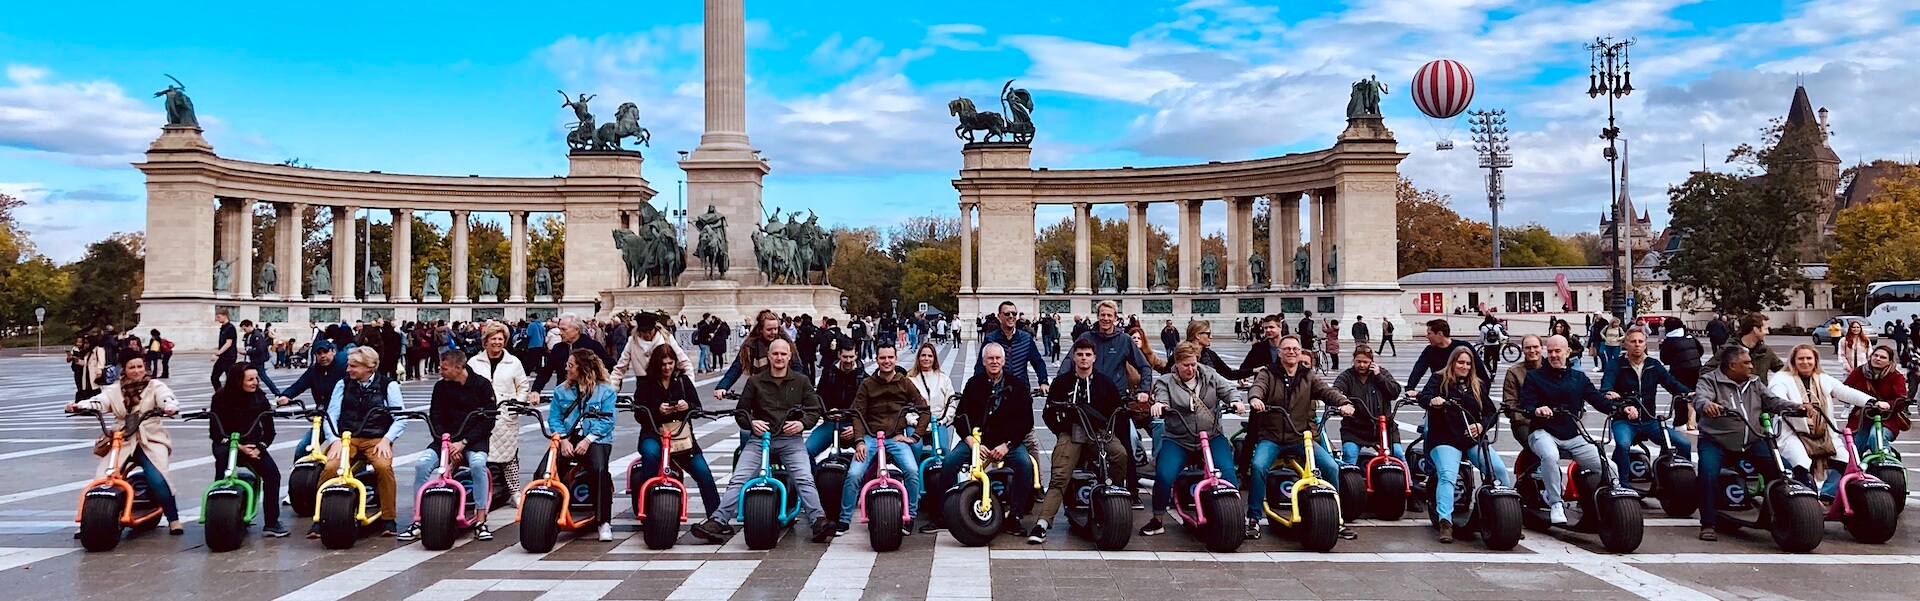 a group of riders on monsteroller e-scooters in front of the Budapest Heroes' Square monument